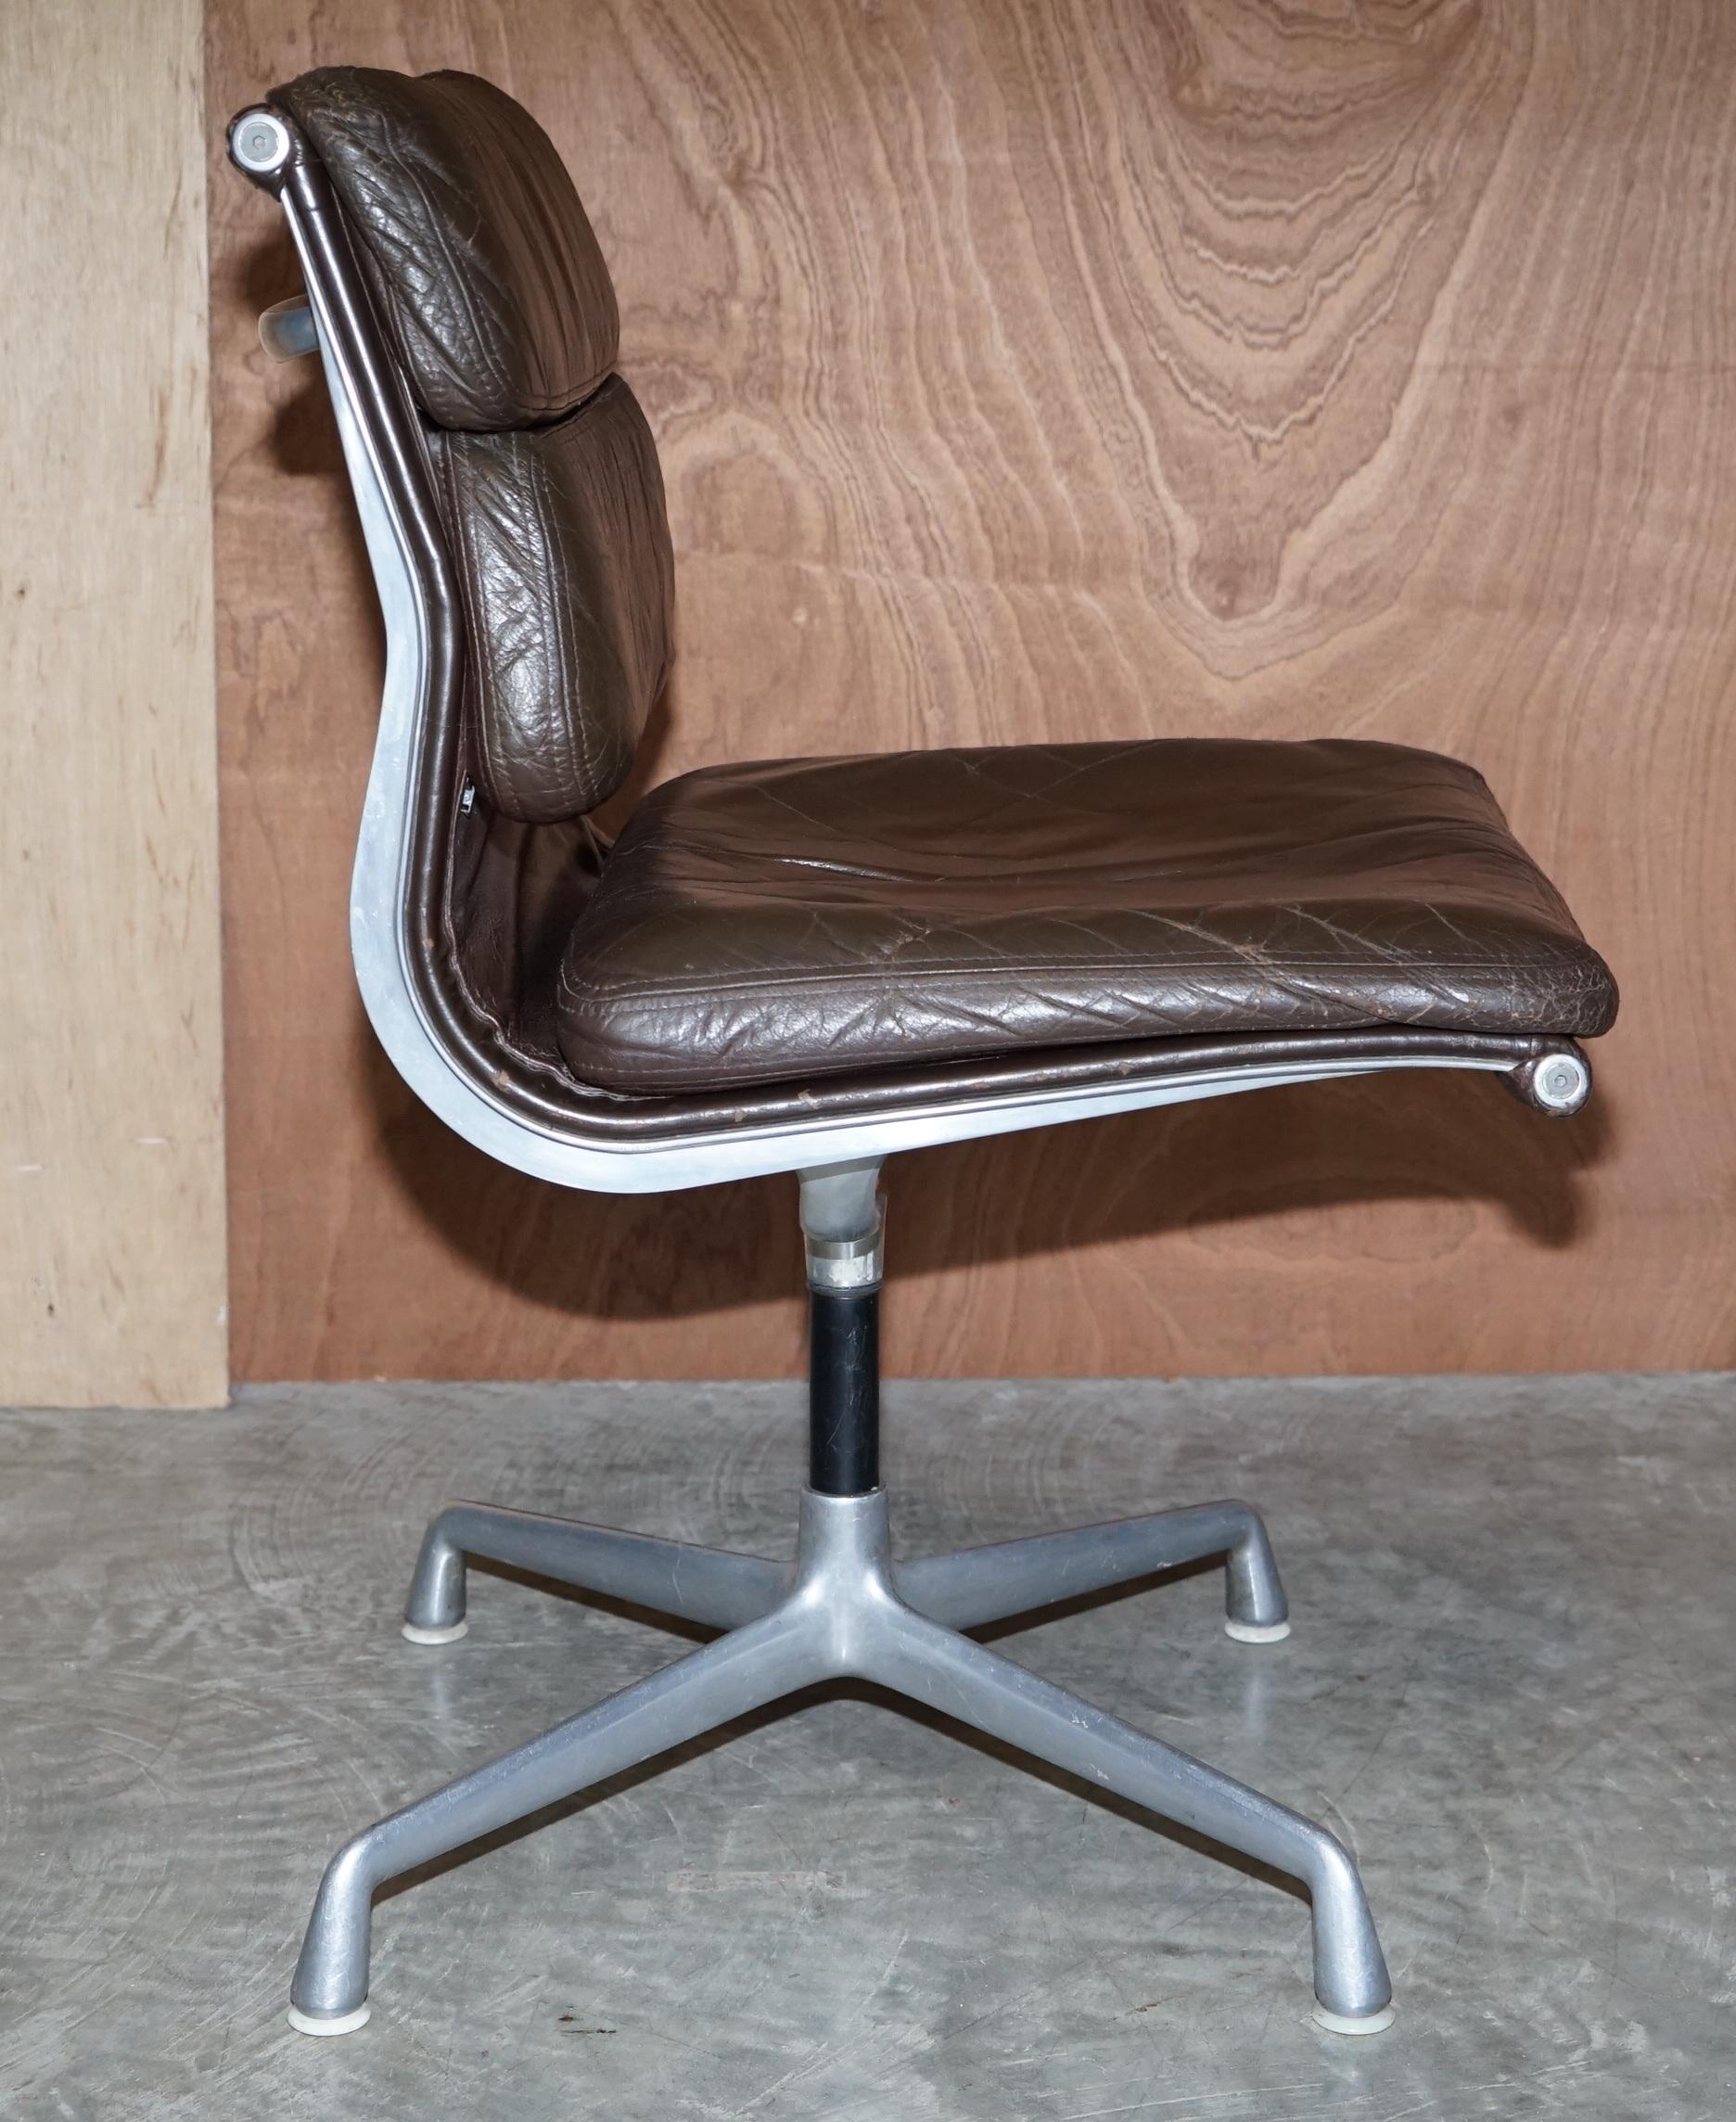 1970 Vitra Eames Herman Miller EA 205 Brown Leather Soft Pad Swivel Office Chair 5